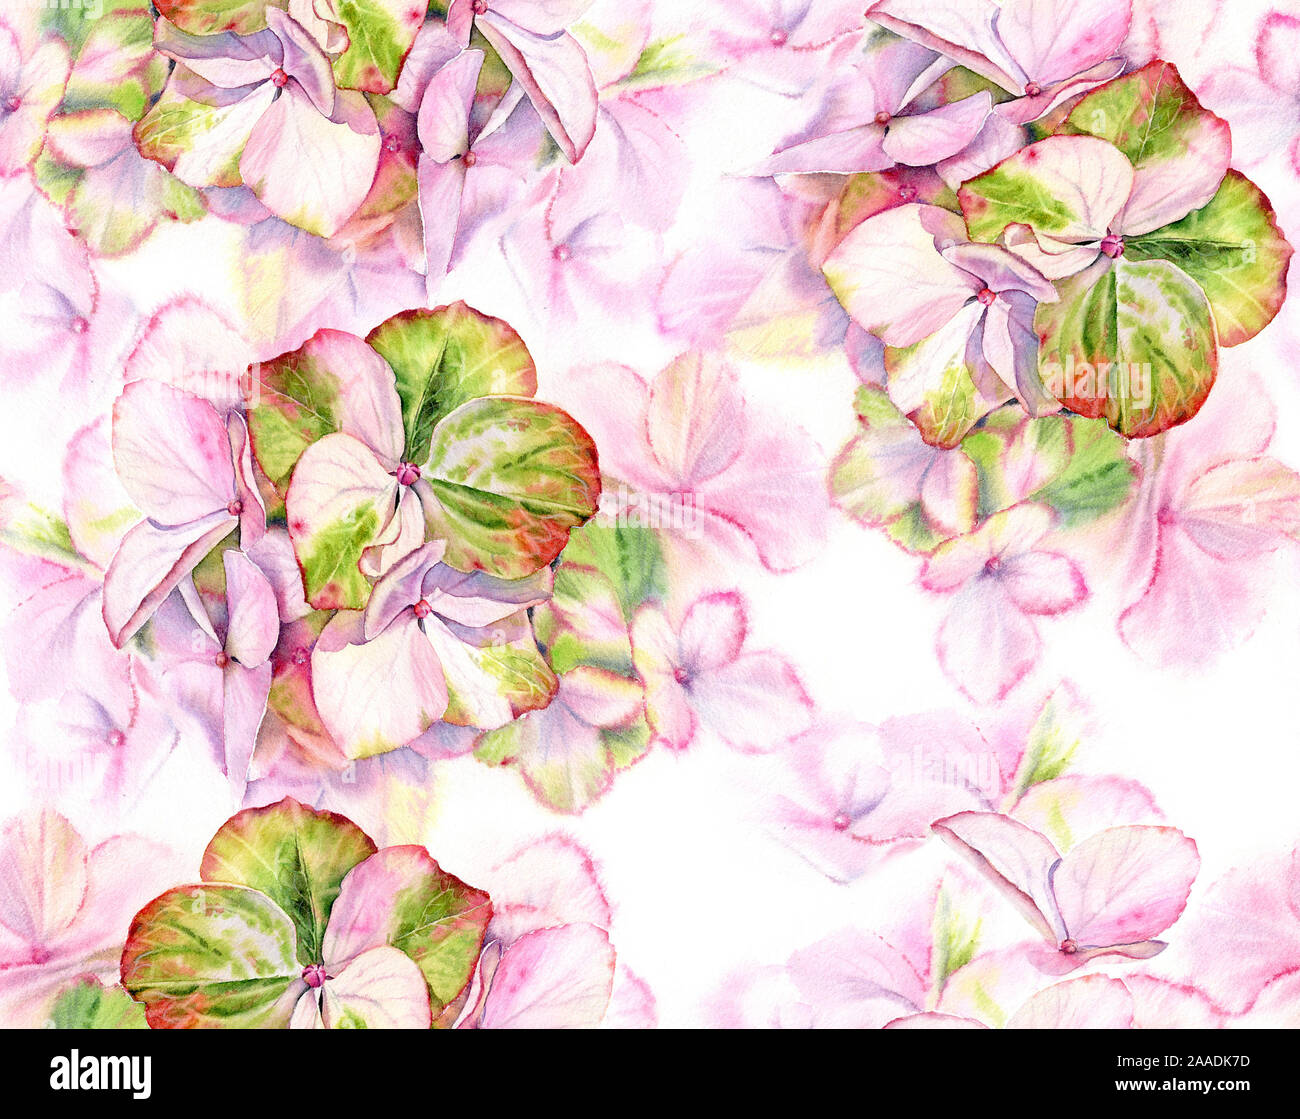 Pink Hydrangea watercolor seamless pattern. Big detailed flowers with pastel green color. Hand drawn floral illustration on white background for Stock Photo